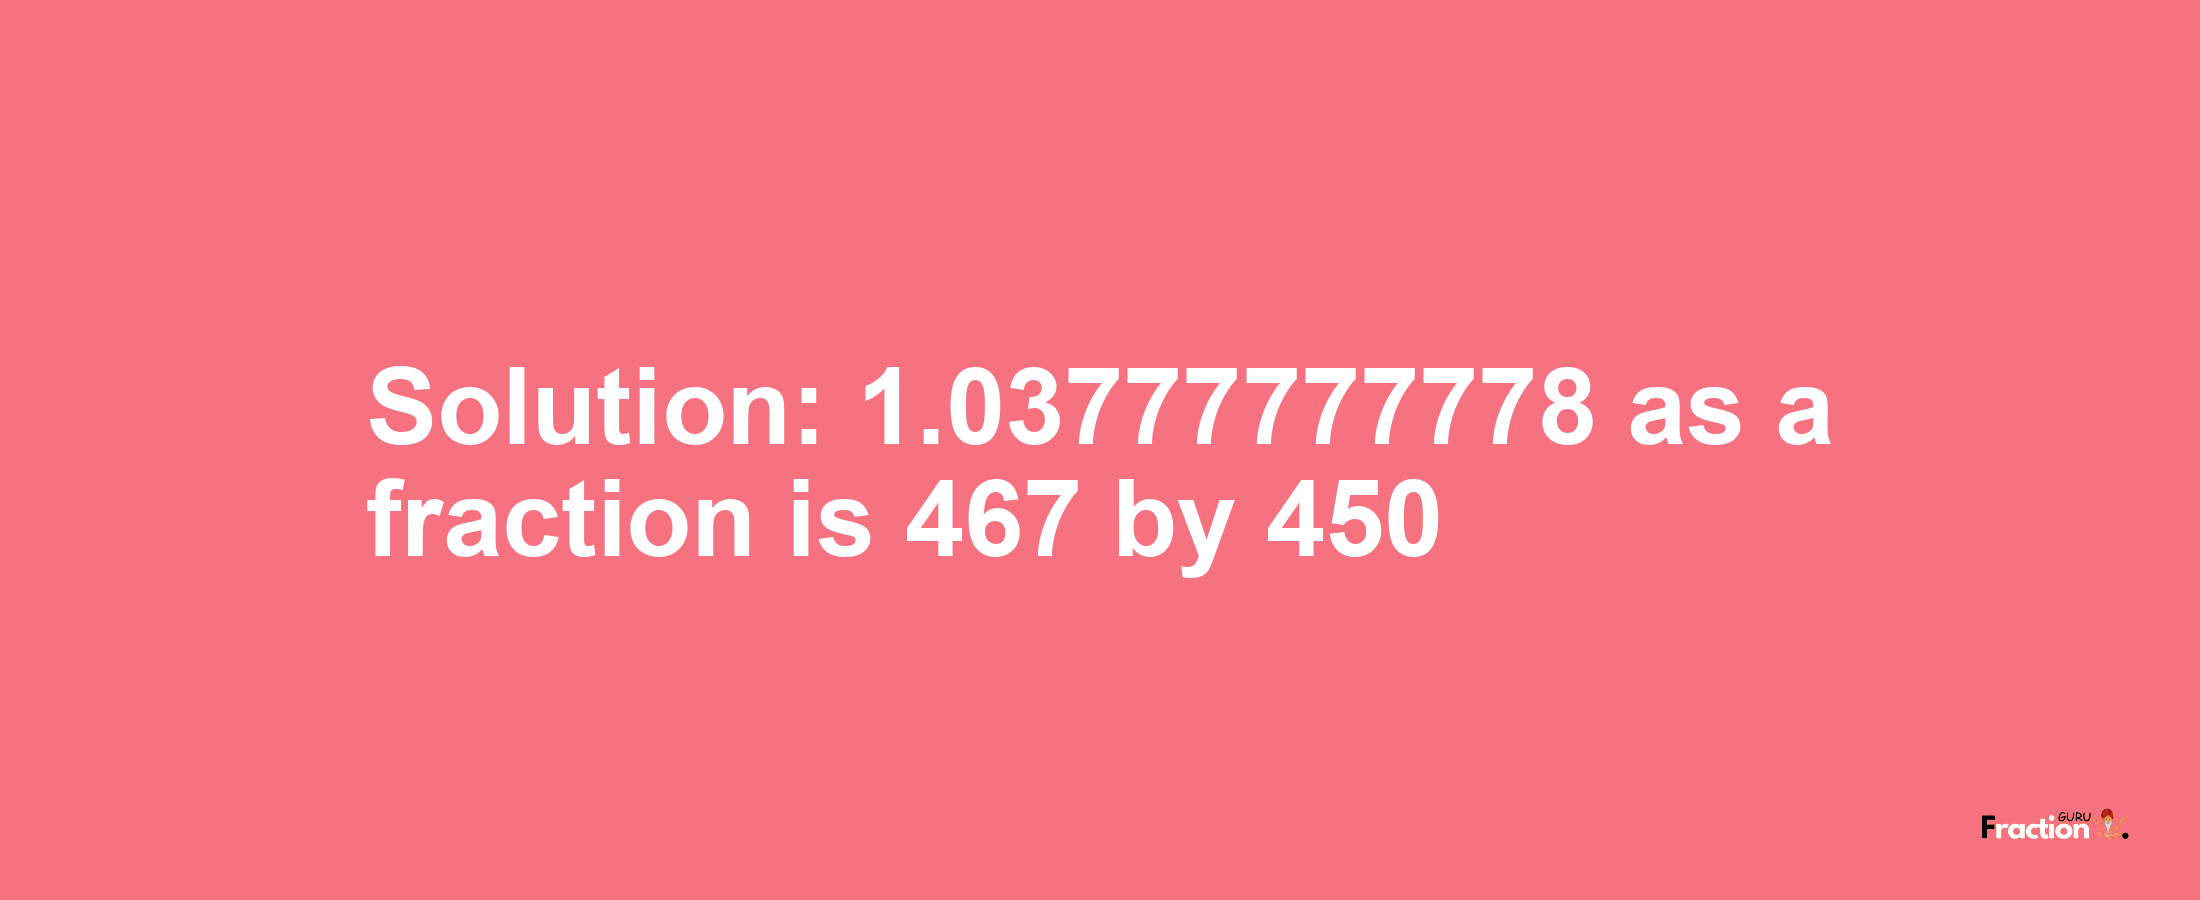 Solution:1.03777777778 as a fraction is 467/450